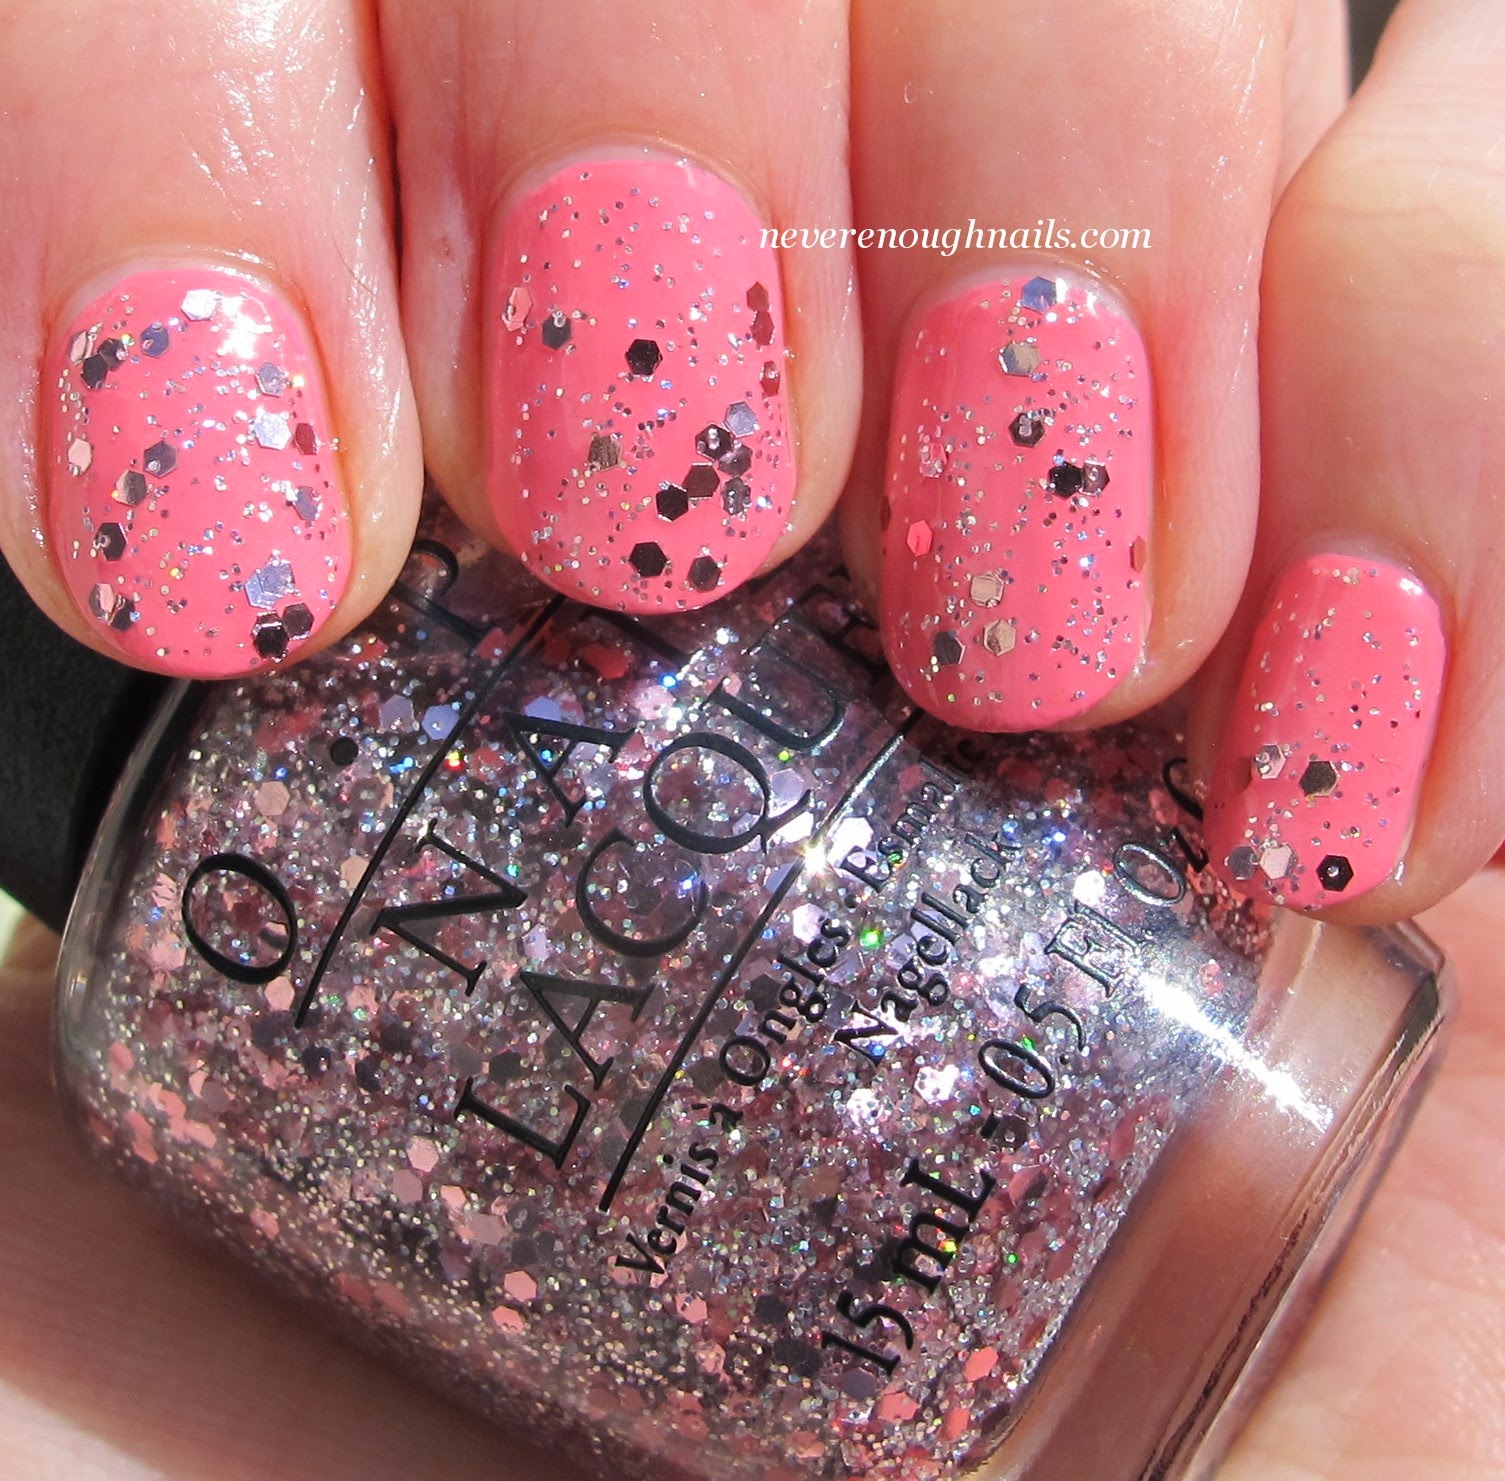 Never Enough Nails: OPI Spotlight on Glitter Swatches, Part 1!